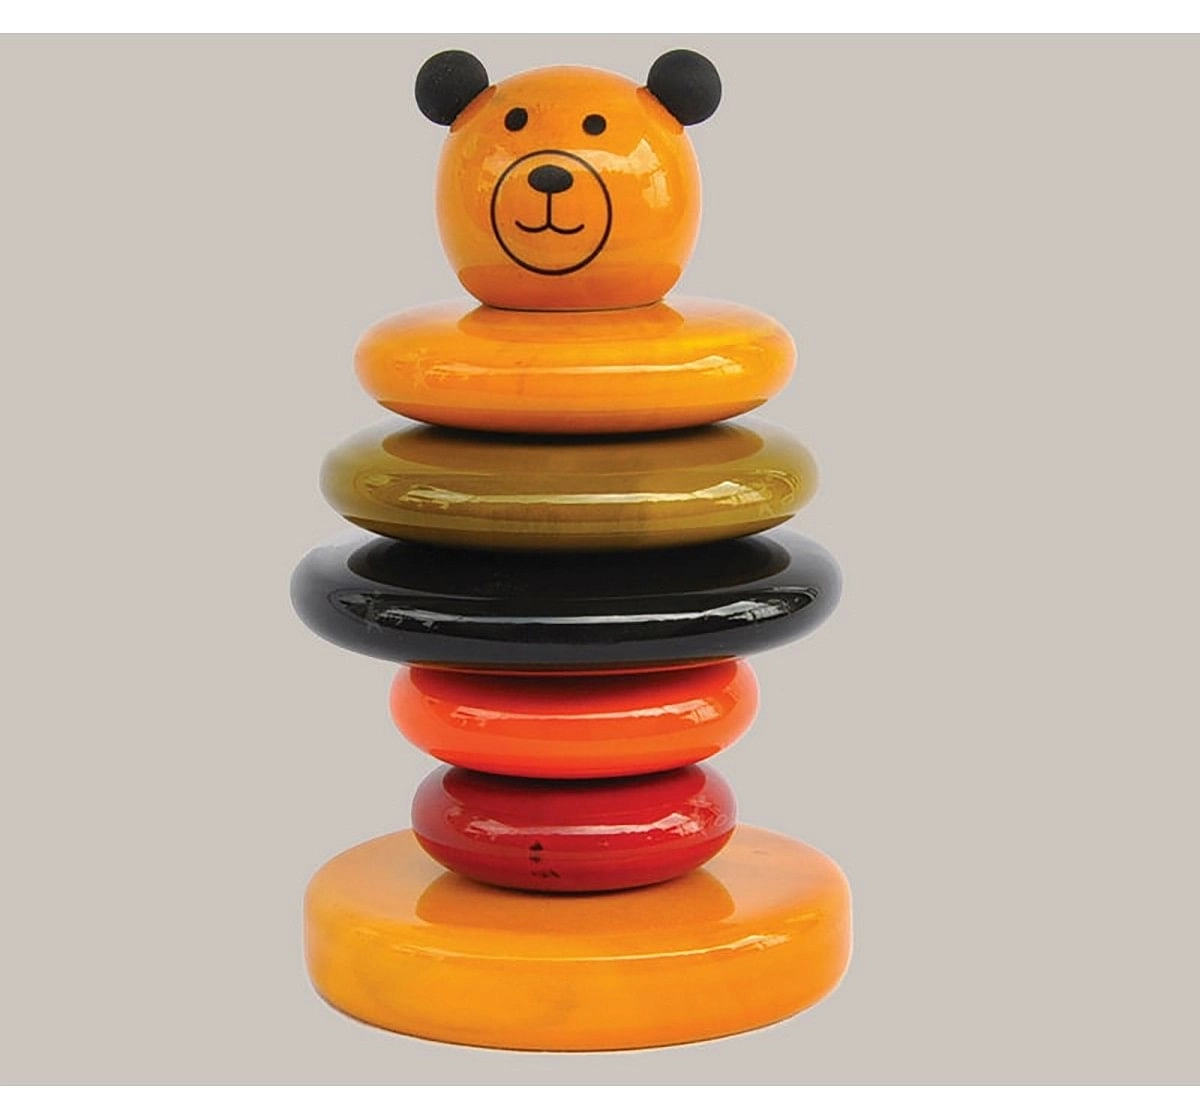 Fairkraft Creations Handmade Cubby Wooden 5-Ring Stacker Toy 1 Wooden Toys for Kids age 1Y+ 